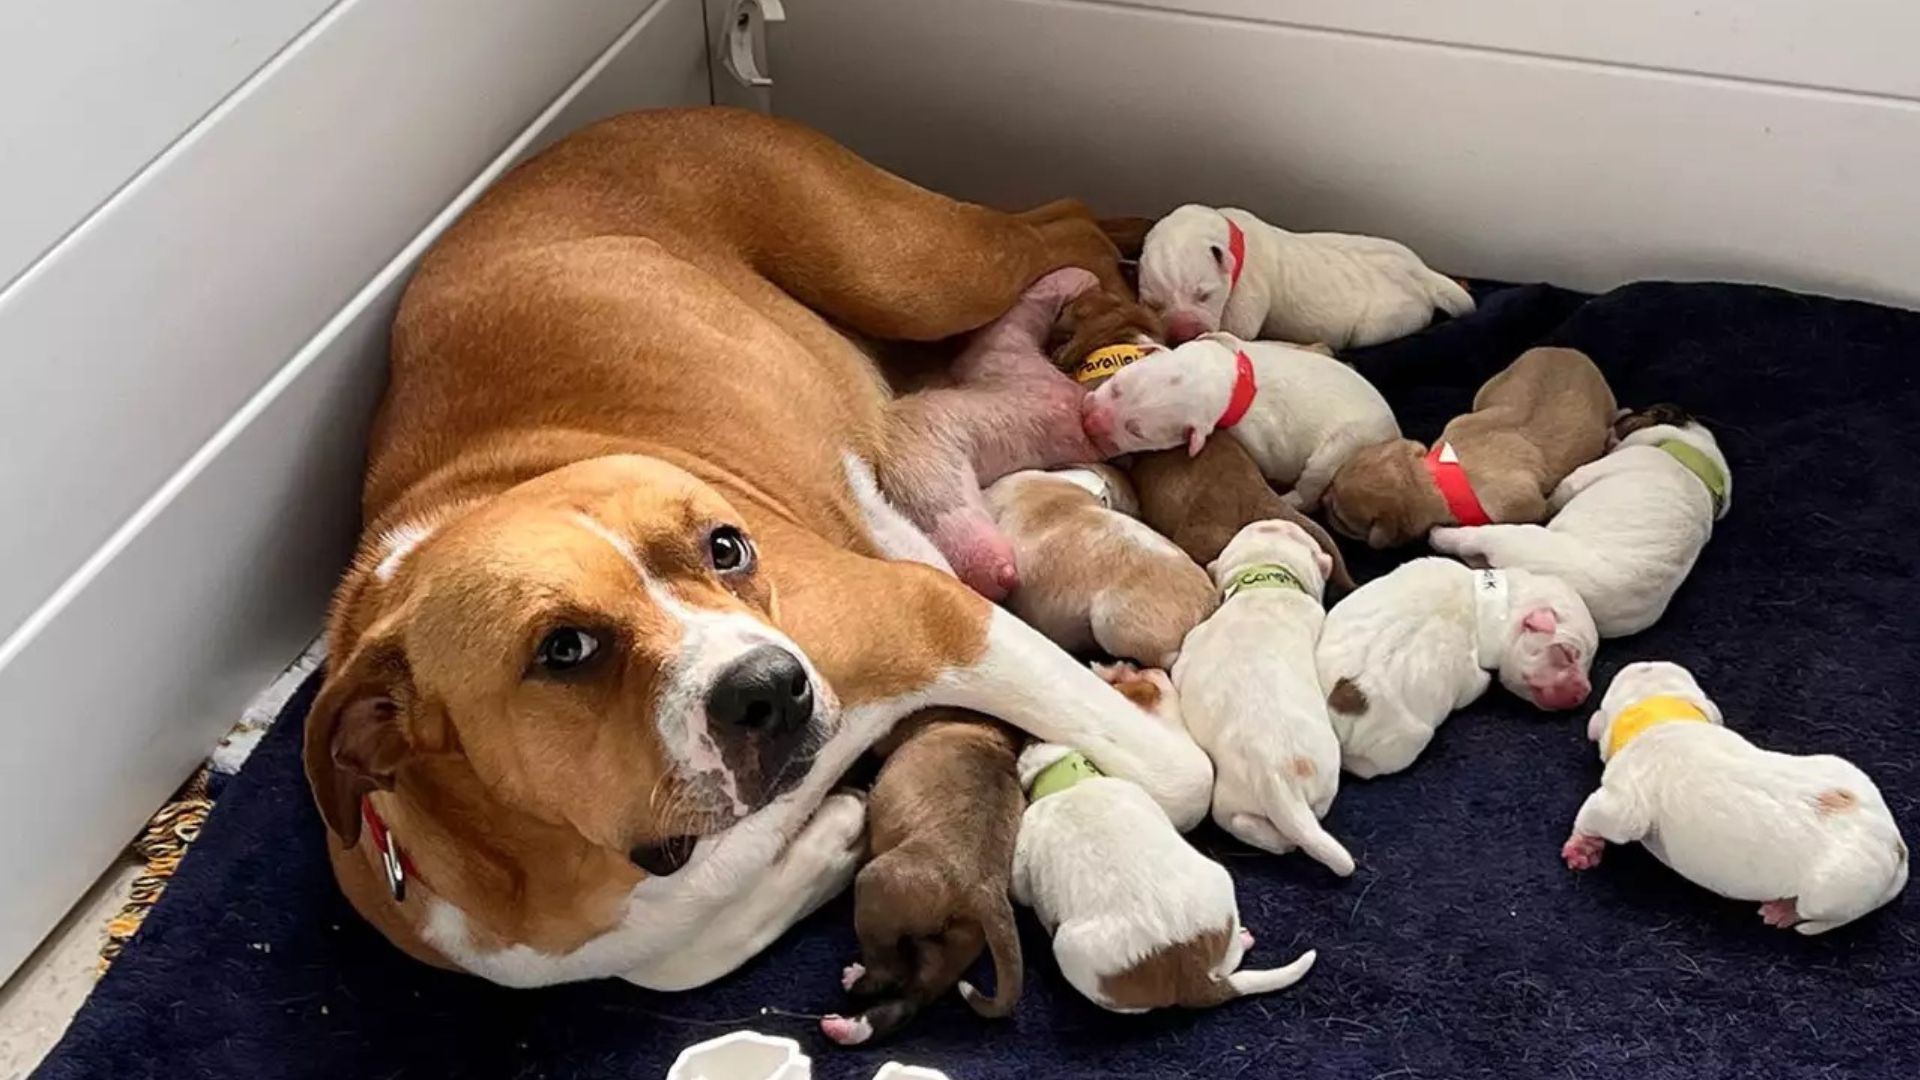 Pregnant Dog Couldn’t Move Anymore But Then Someone Amazing Came To Help Her